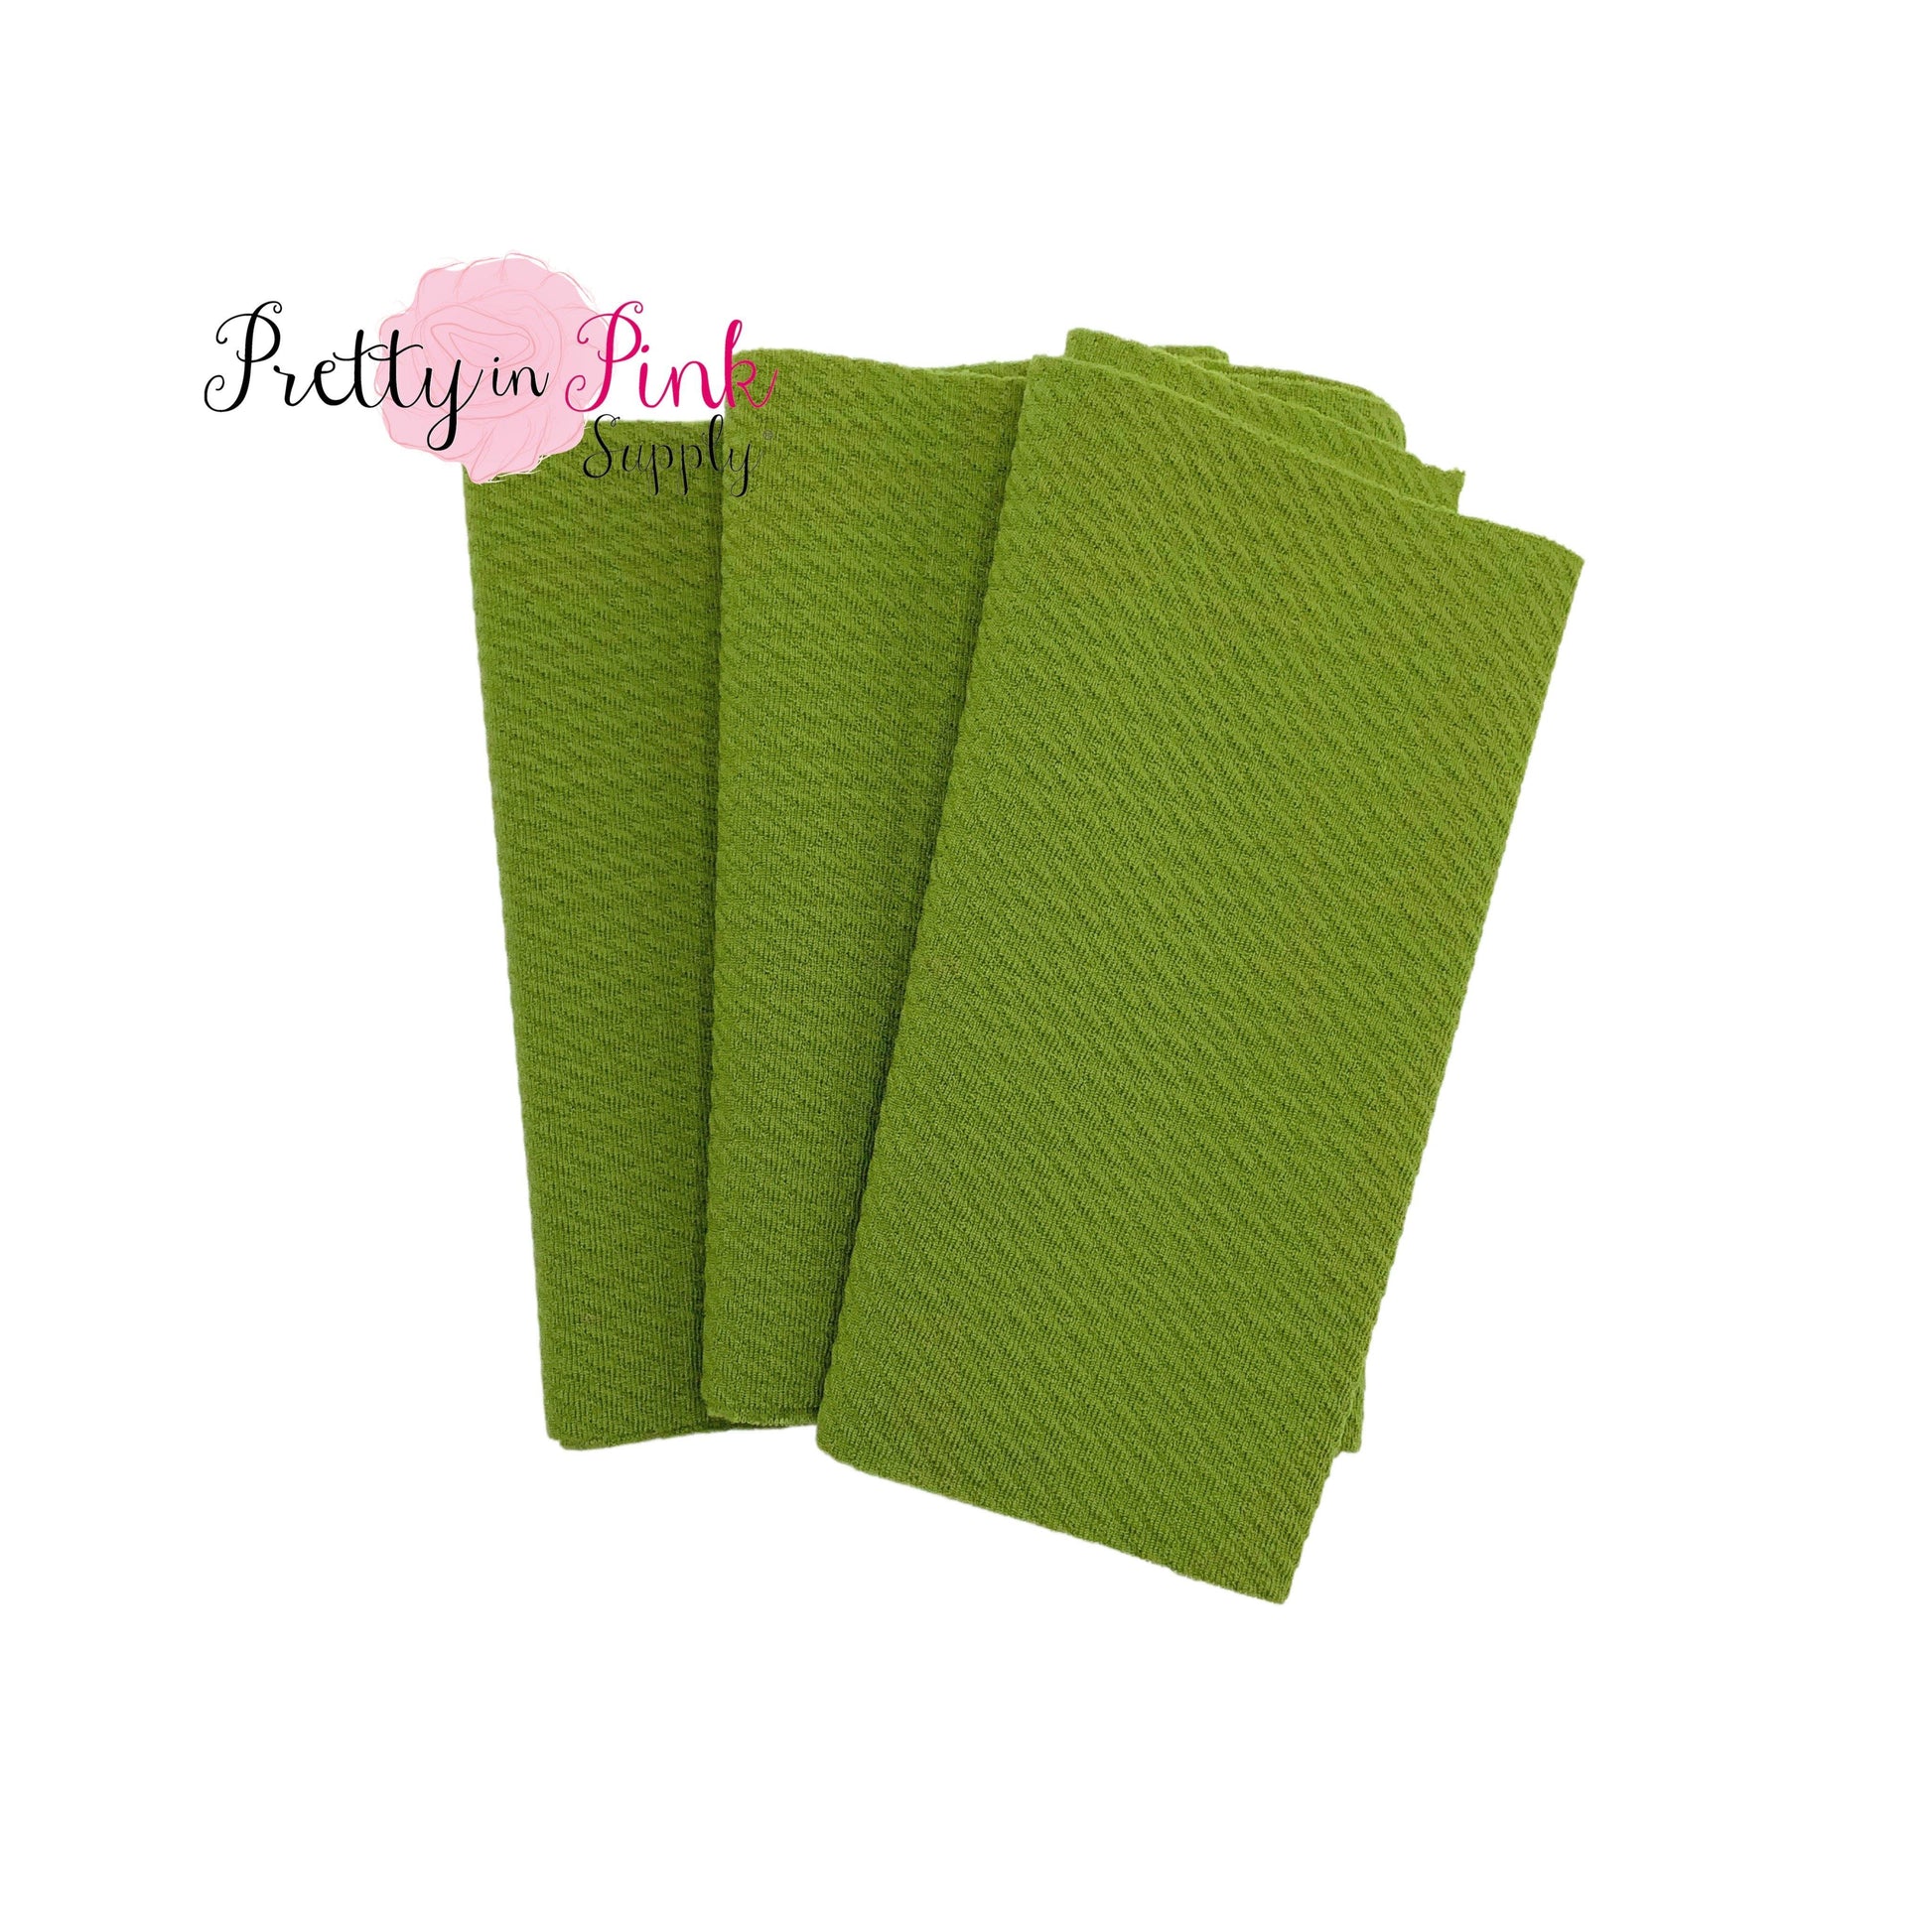 Fern Green | Solid Stretch Liverpool Fabric - Pretty in Pink Supply